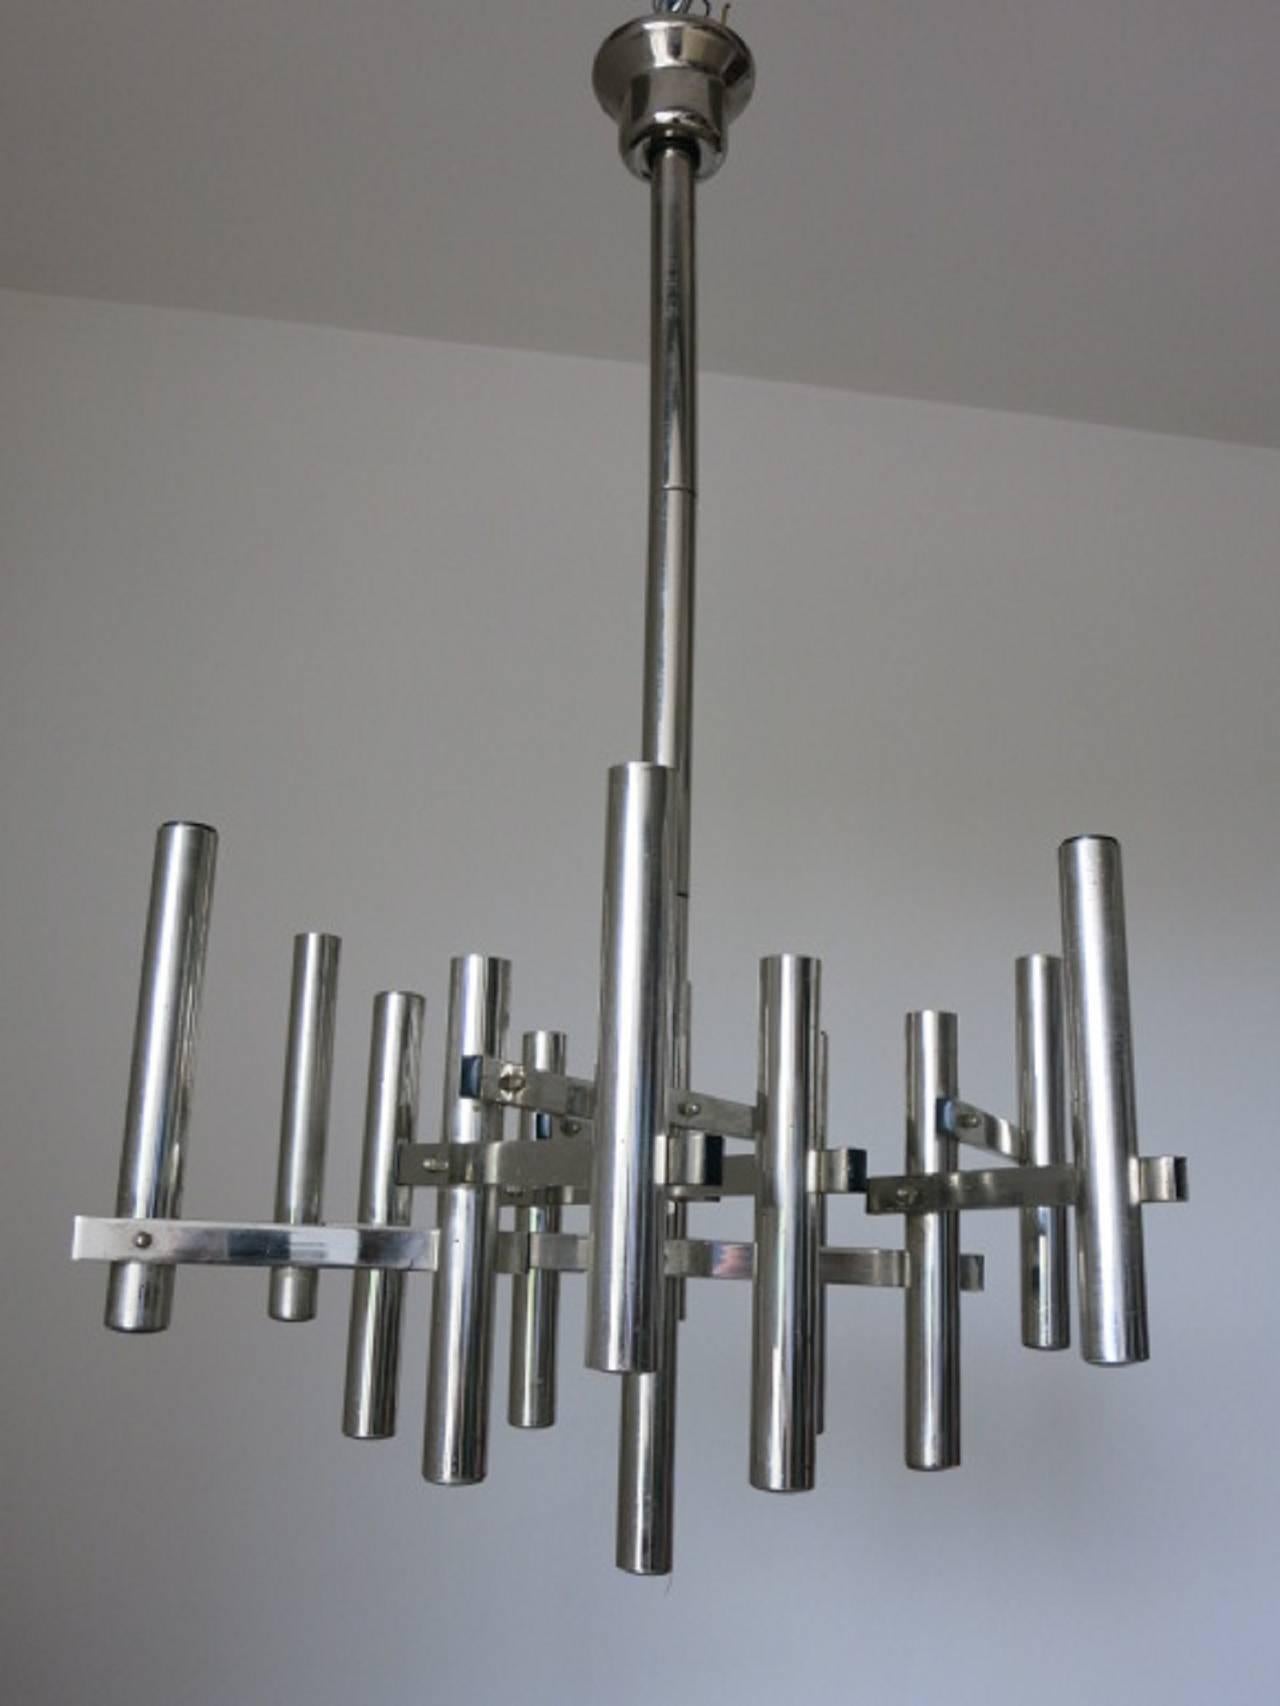 Original vintage tubular chrome pendant / Designed by Sciolari circa 1960’s / Made in Italy 
12 lights / E14 type / max 40W each
Diameter: 24 inches / Height: 37 inches including rod and canopy
1 in stock in Palm Springs currently ON 50% OFF SALE